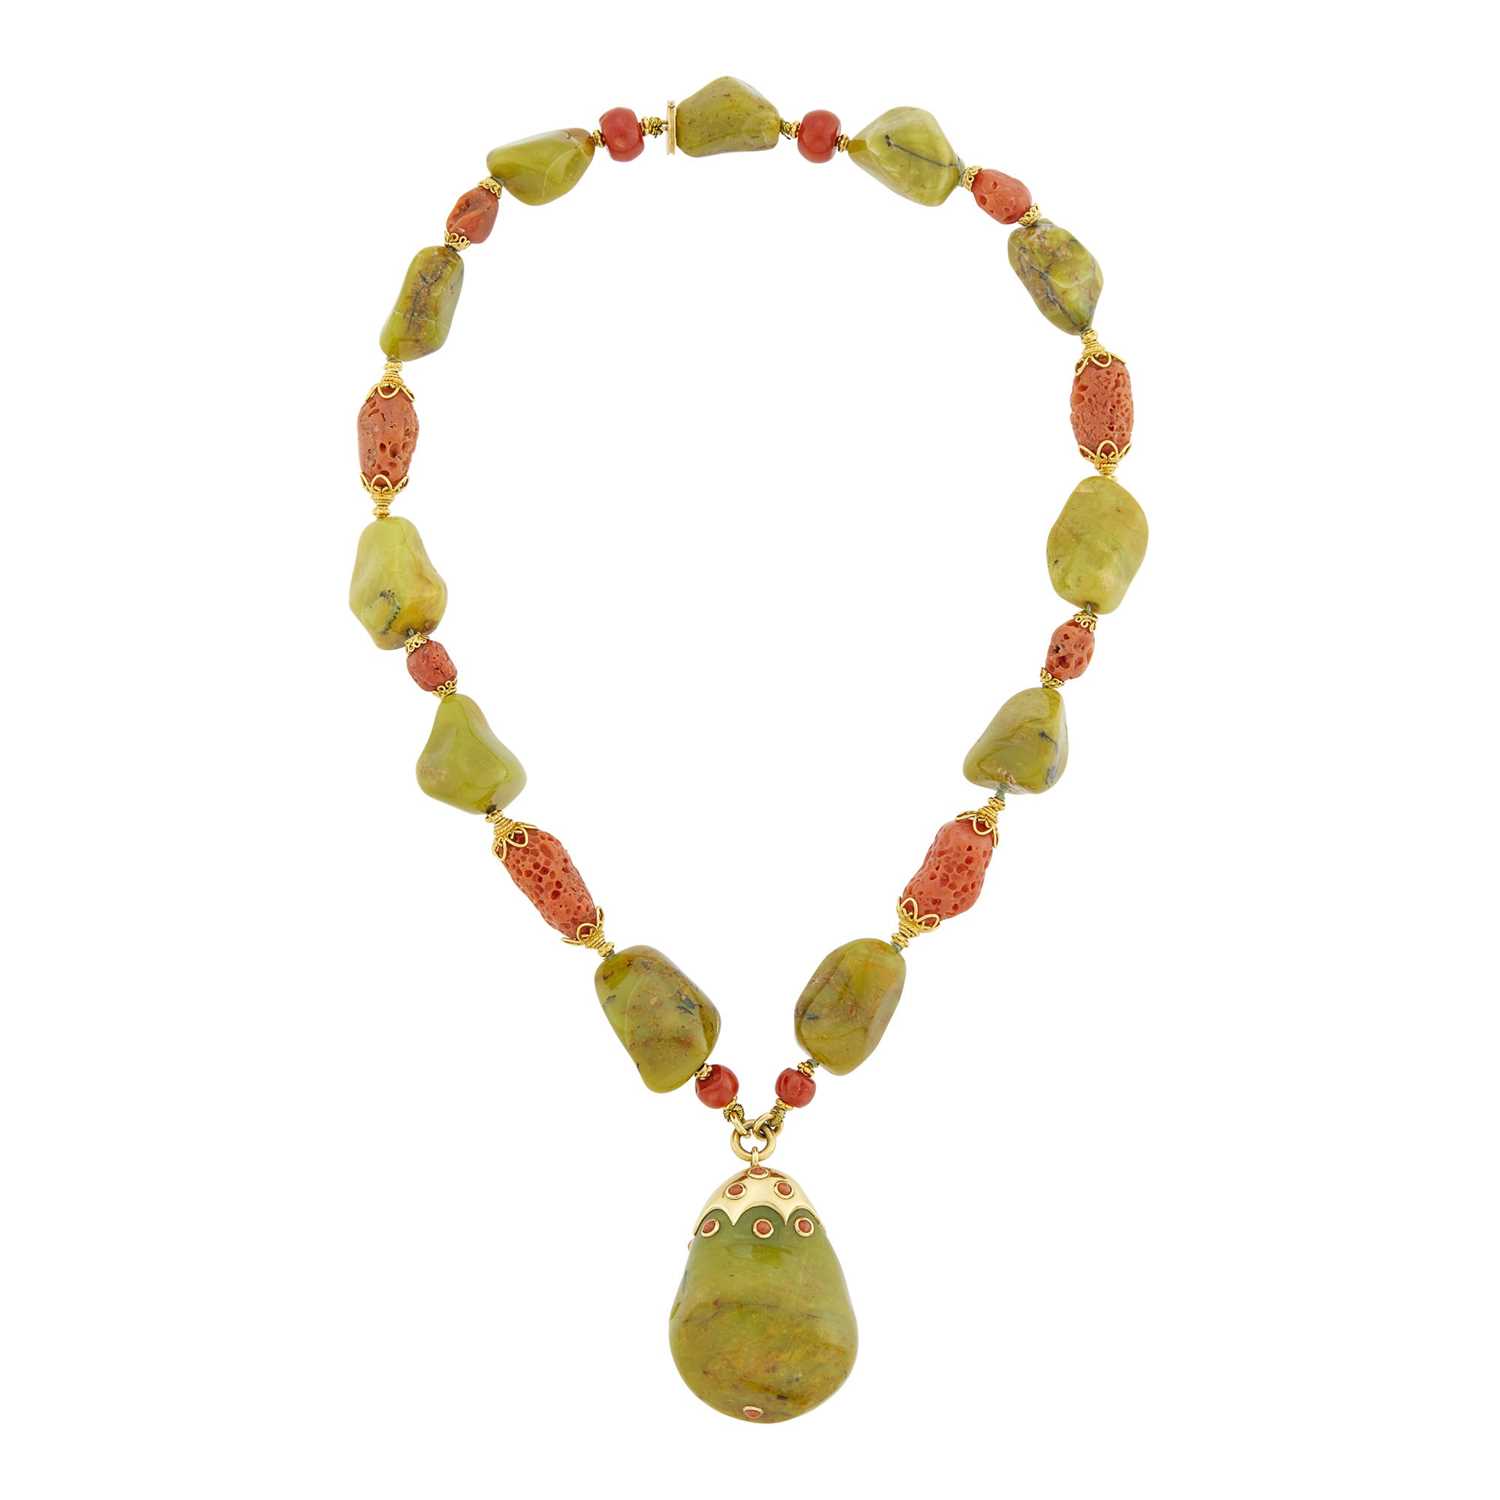 Lot 8 - Verdura Gold, Green Agate and Sponge Coral Bead Pendant-Necklace